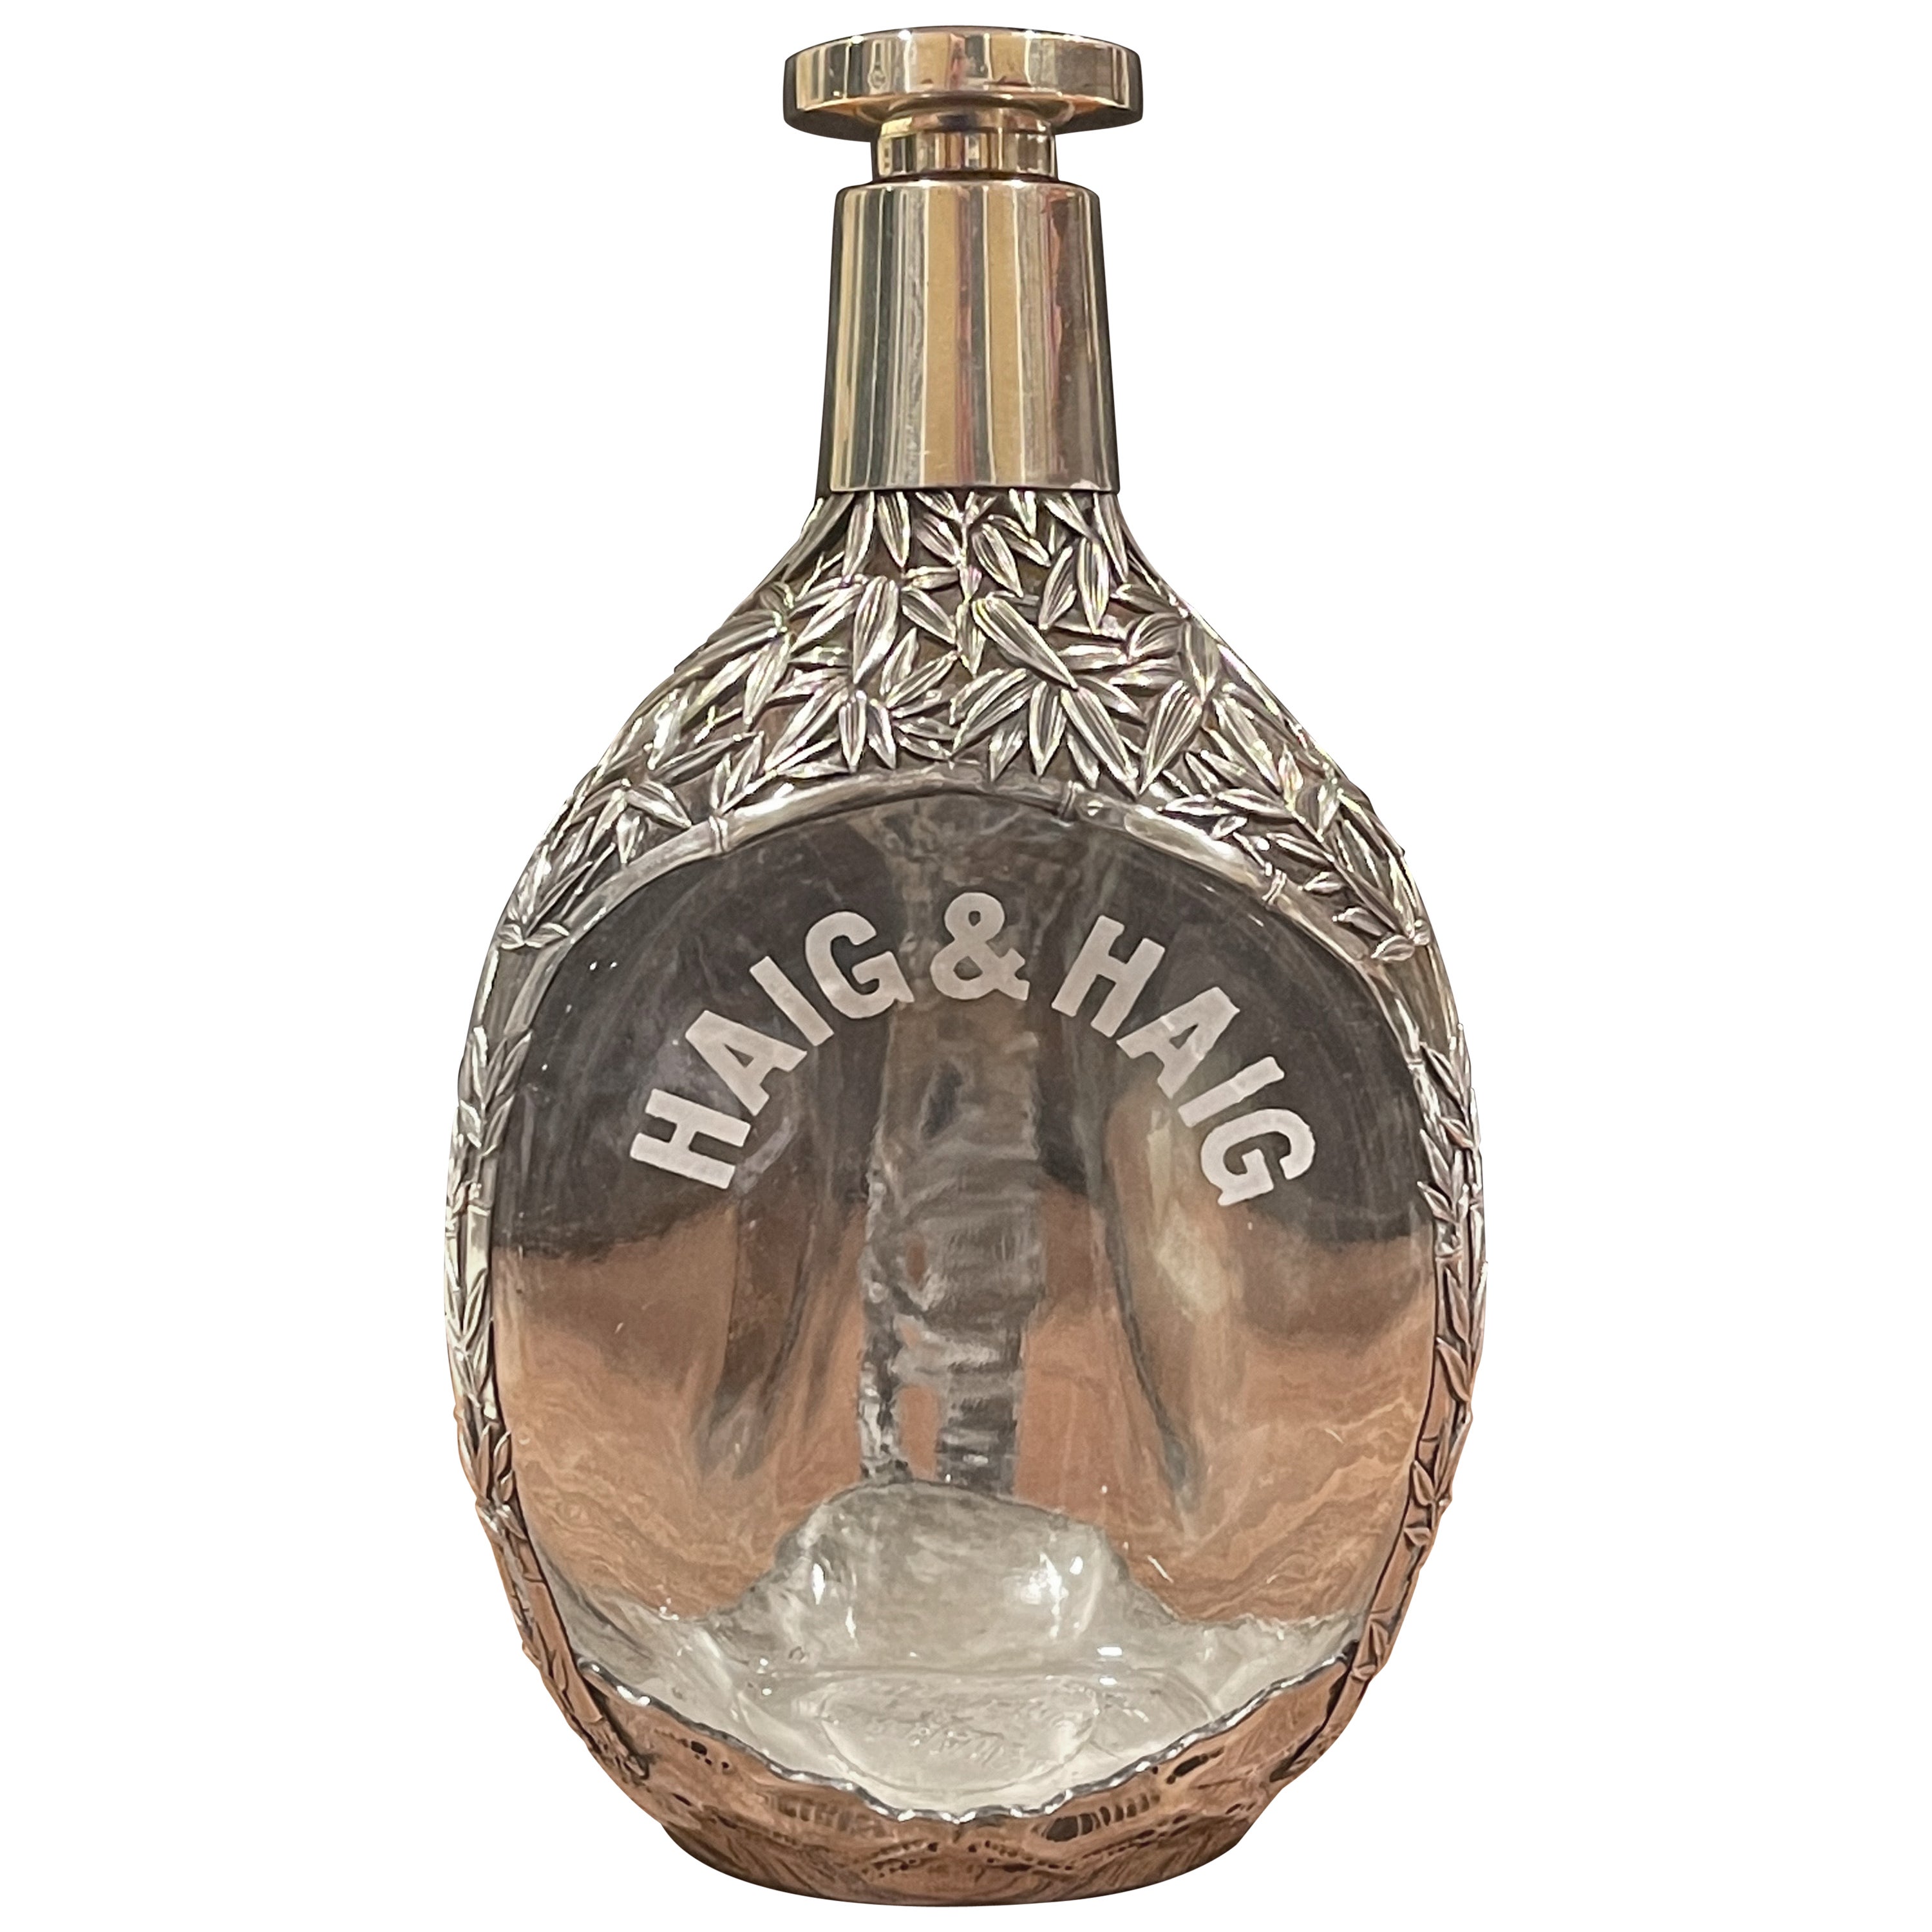 Mid-Century "Haig & Haig Scotch" Glass Decanter with Sterling Silver Overlay